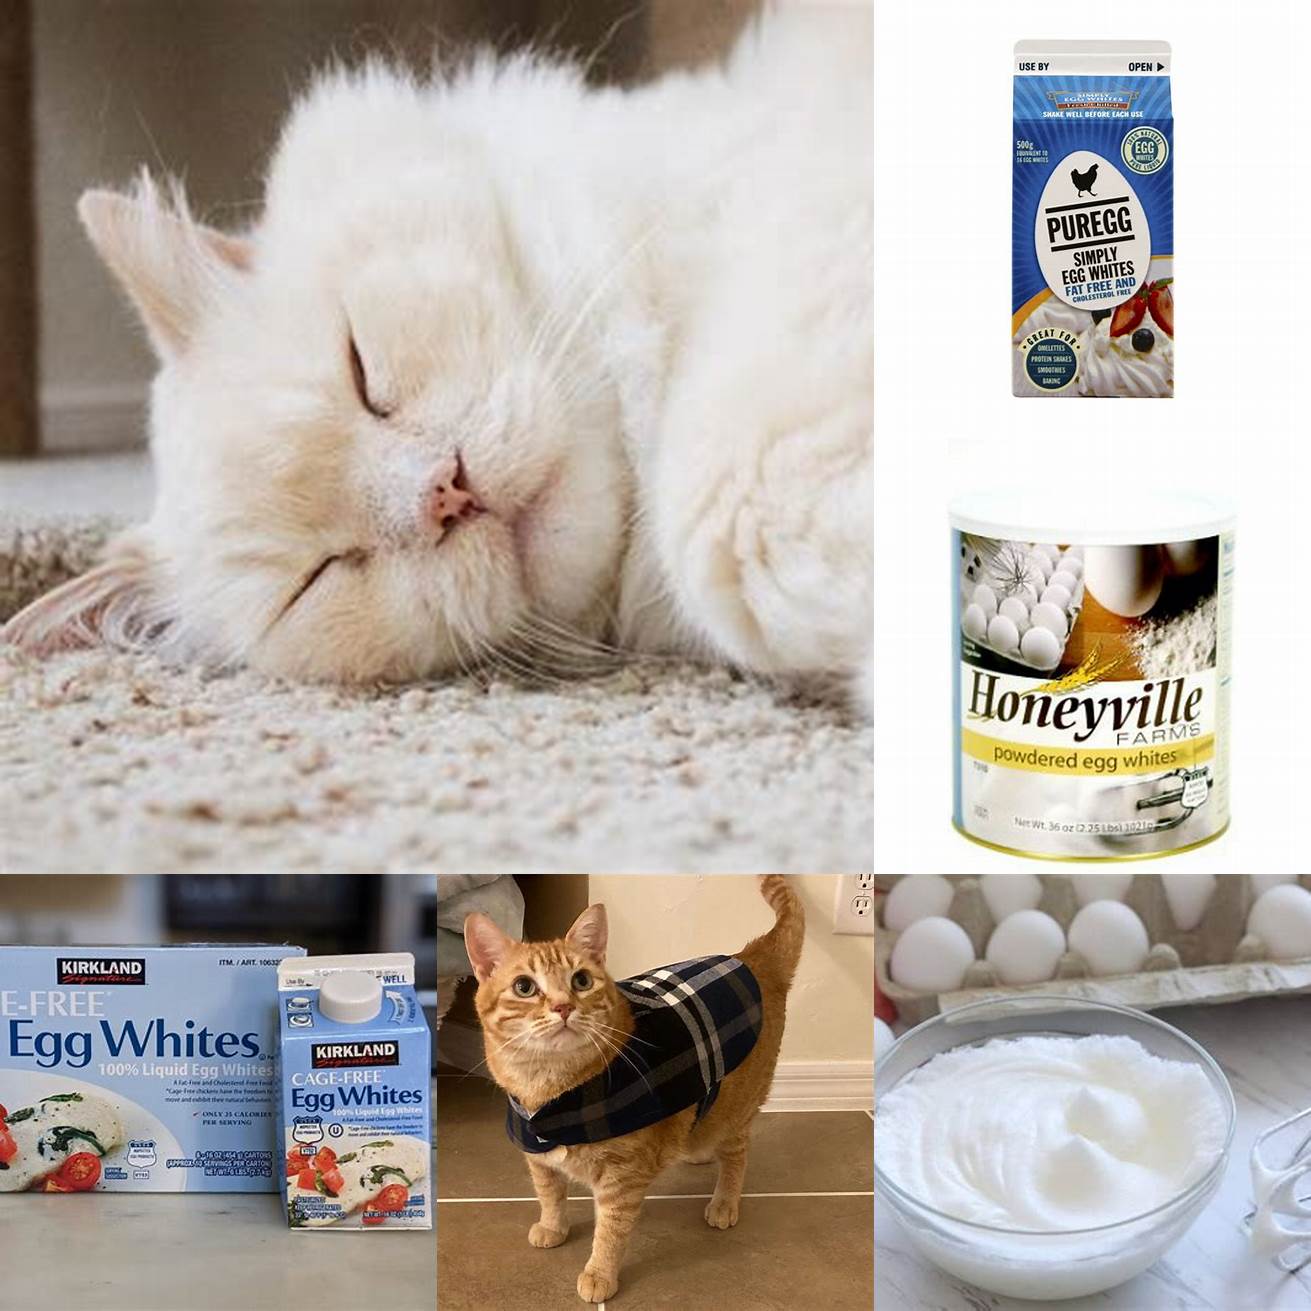 Egg whites can help improve your cats coat